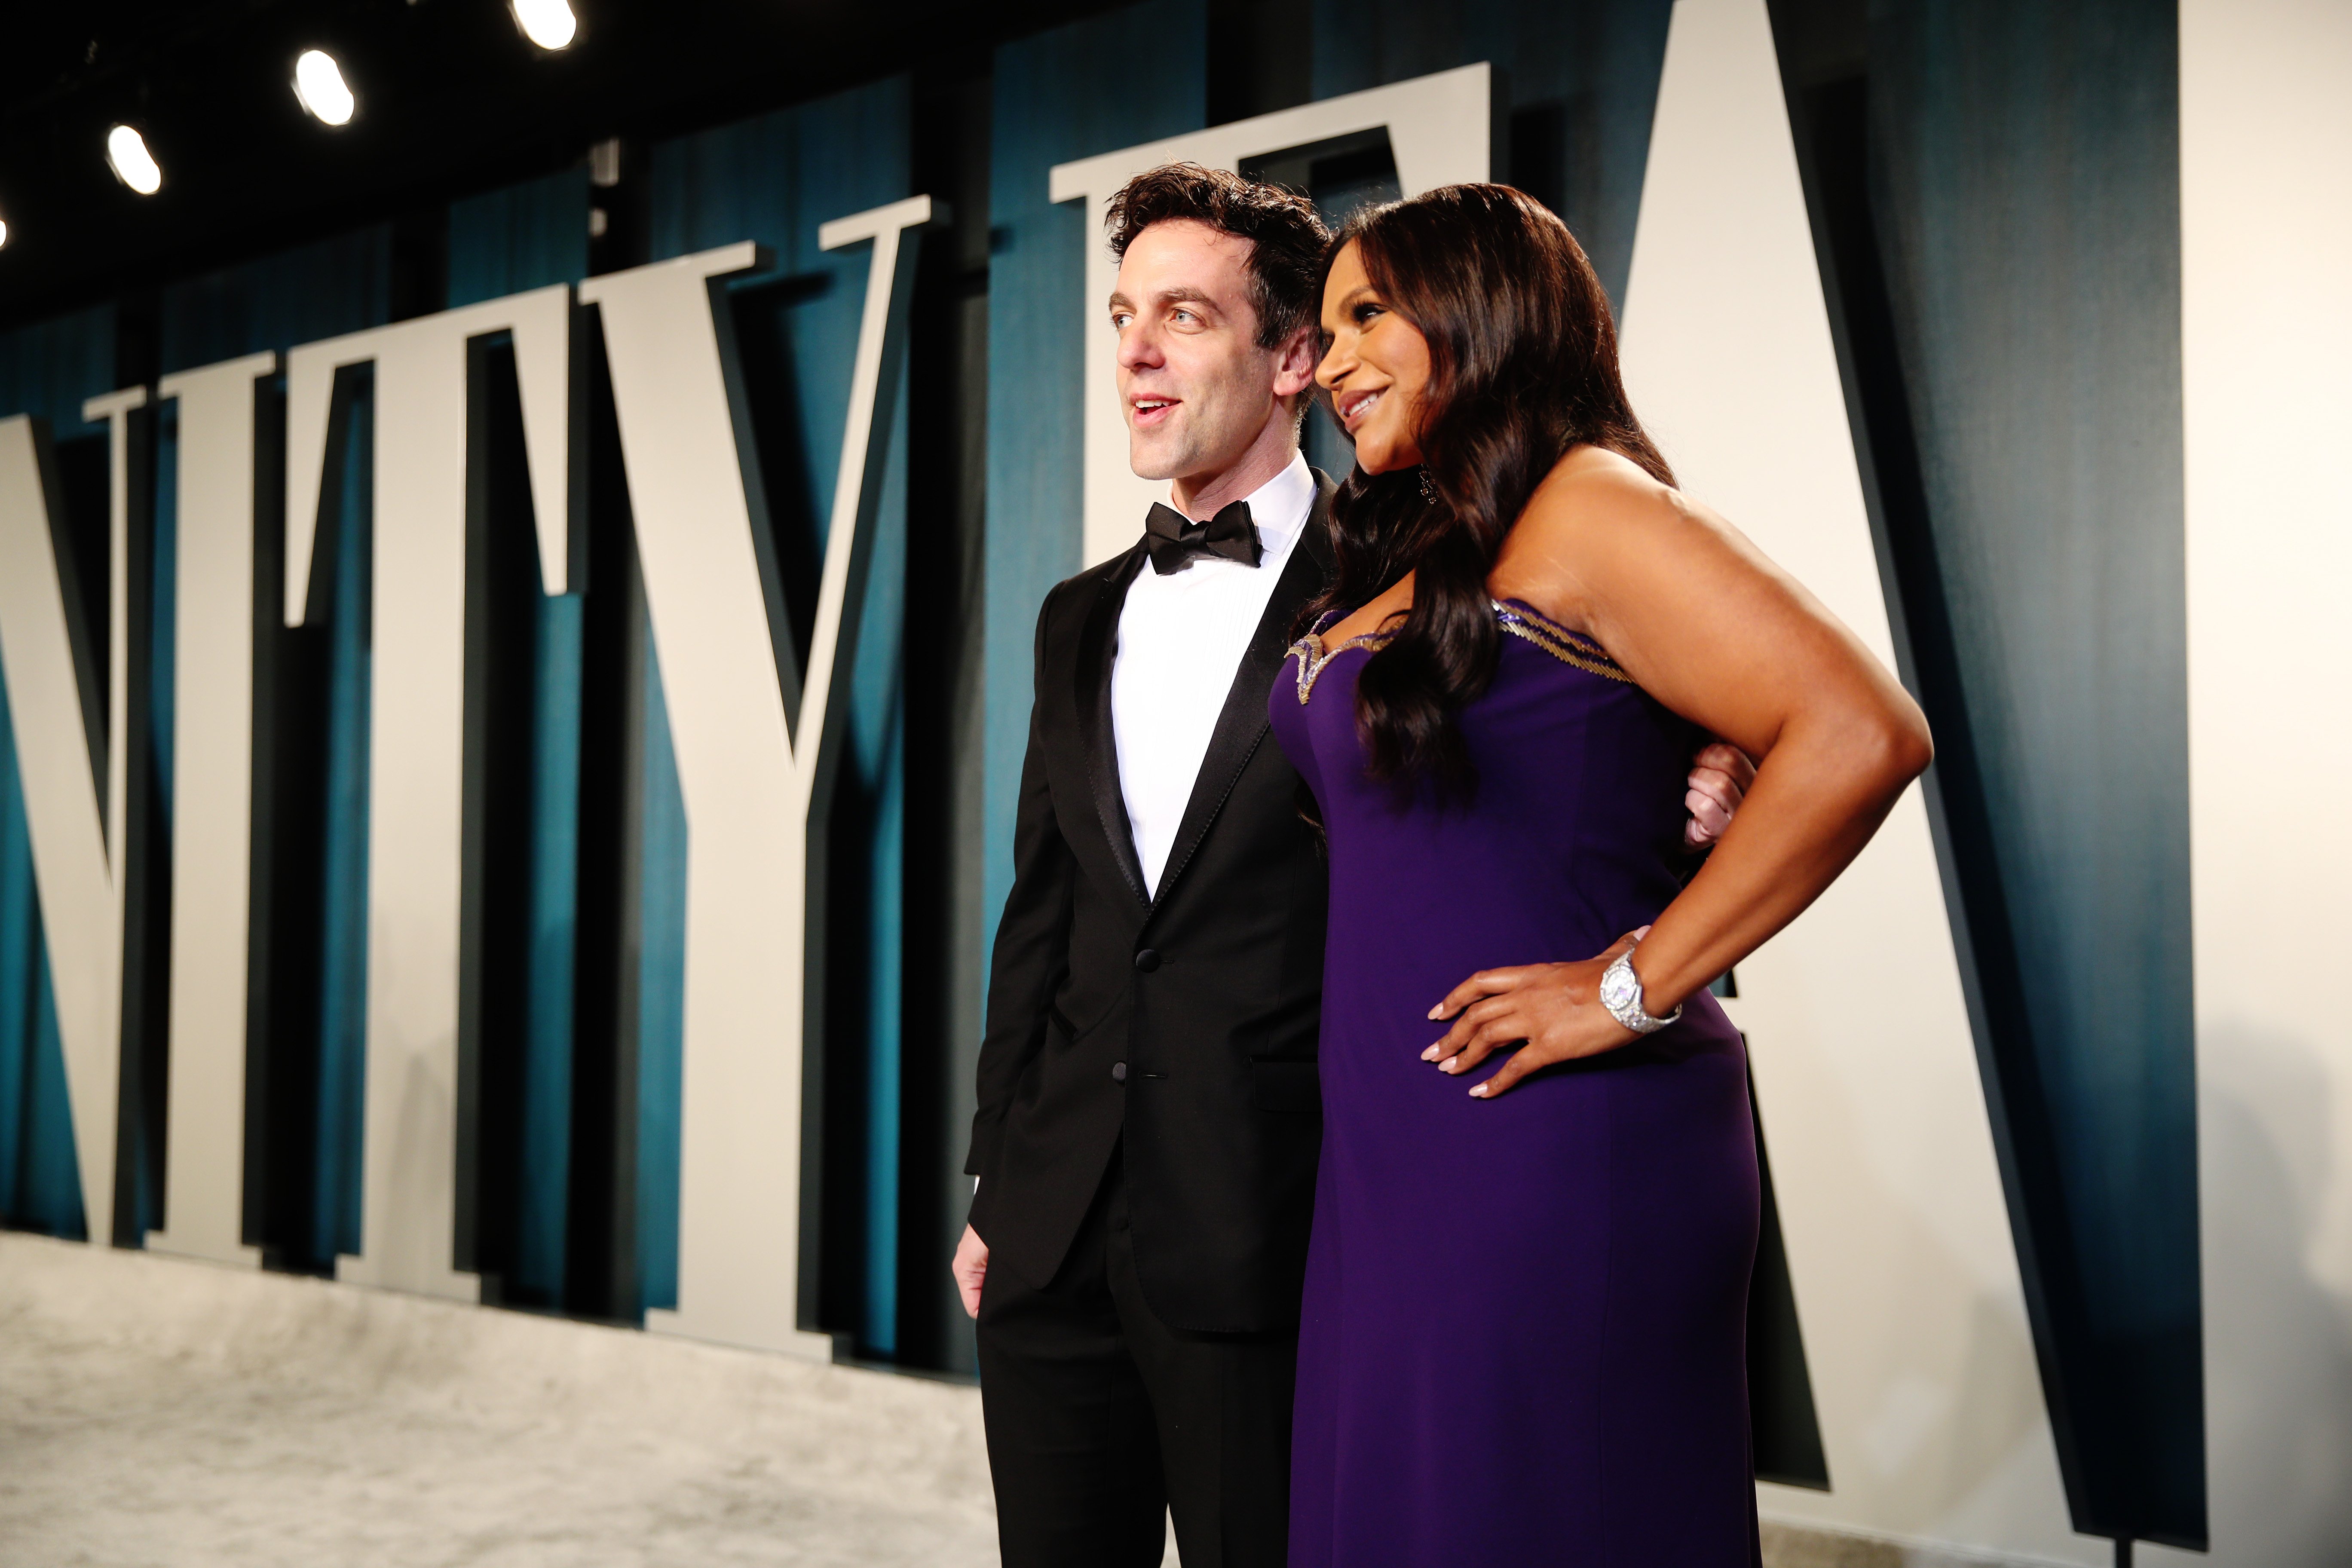 B.J. Novak and Mindy Kaling attend the 2020 Vanity Fair Oscar Party at Wallis Annenberg Center for the Performing Arts on February 9, 2020, in Beverly Hills, California. | Source: Getty Images